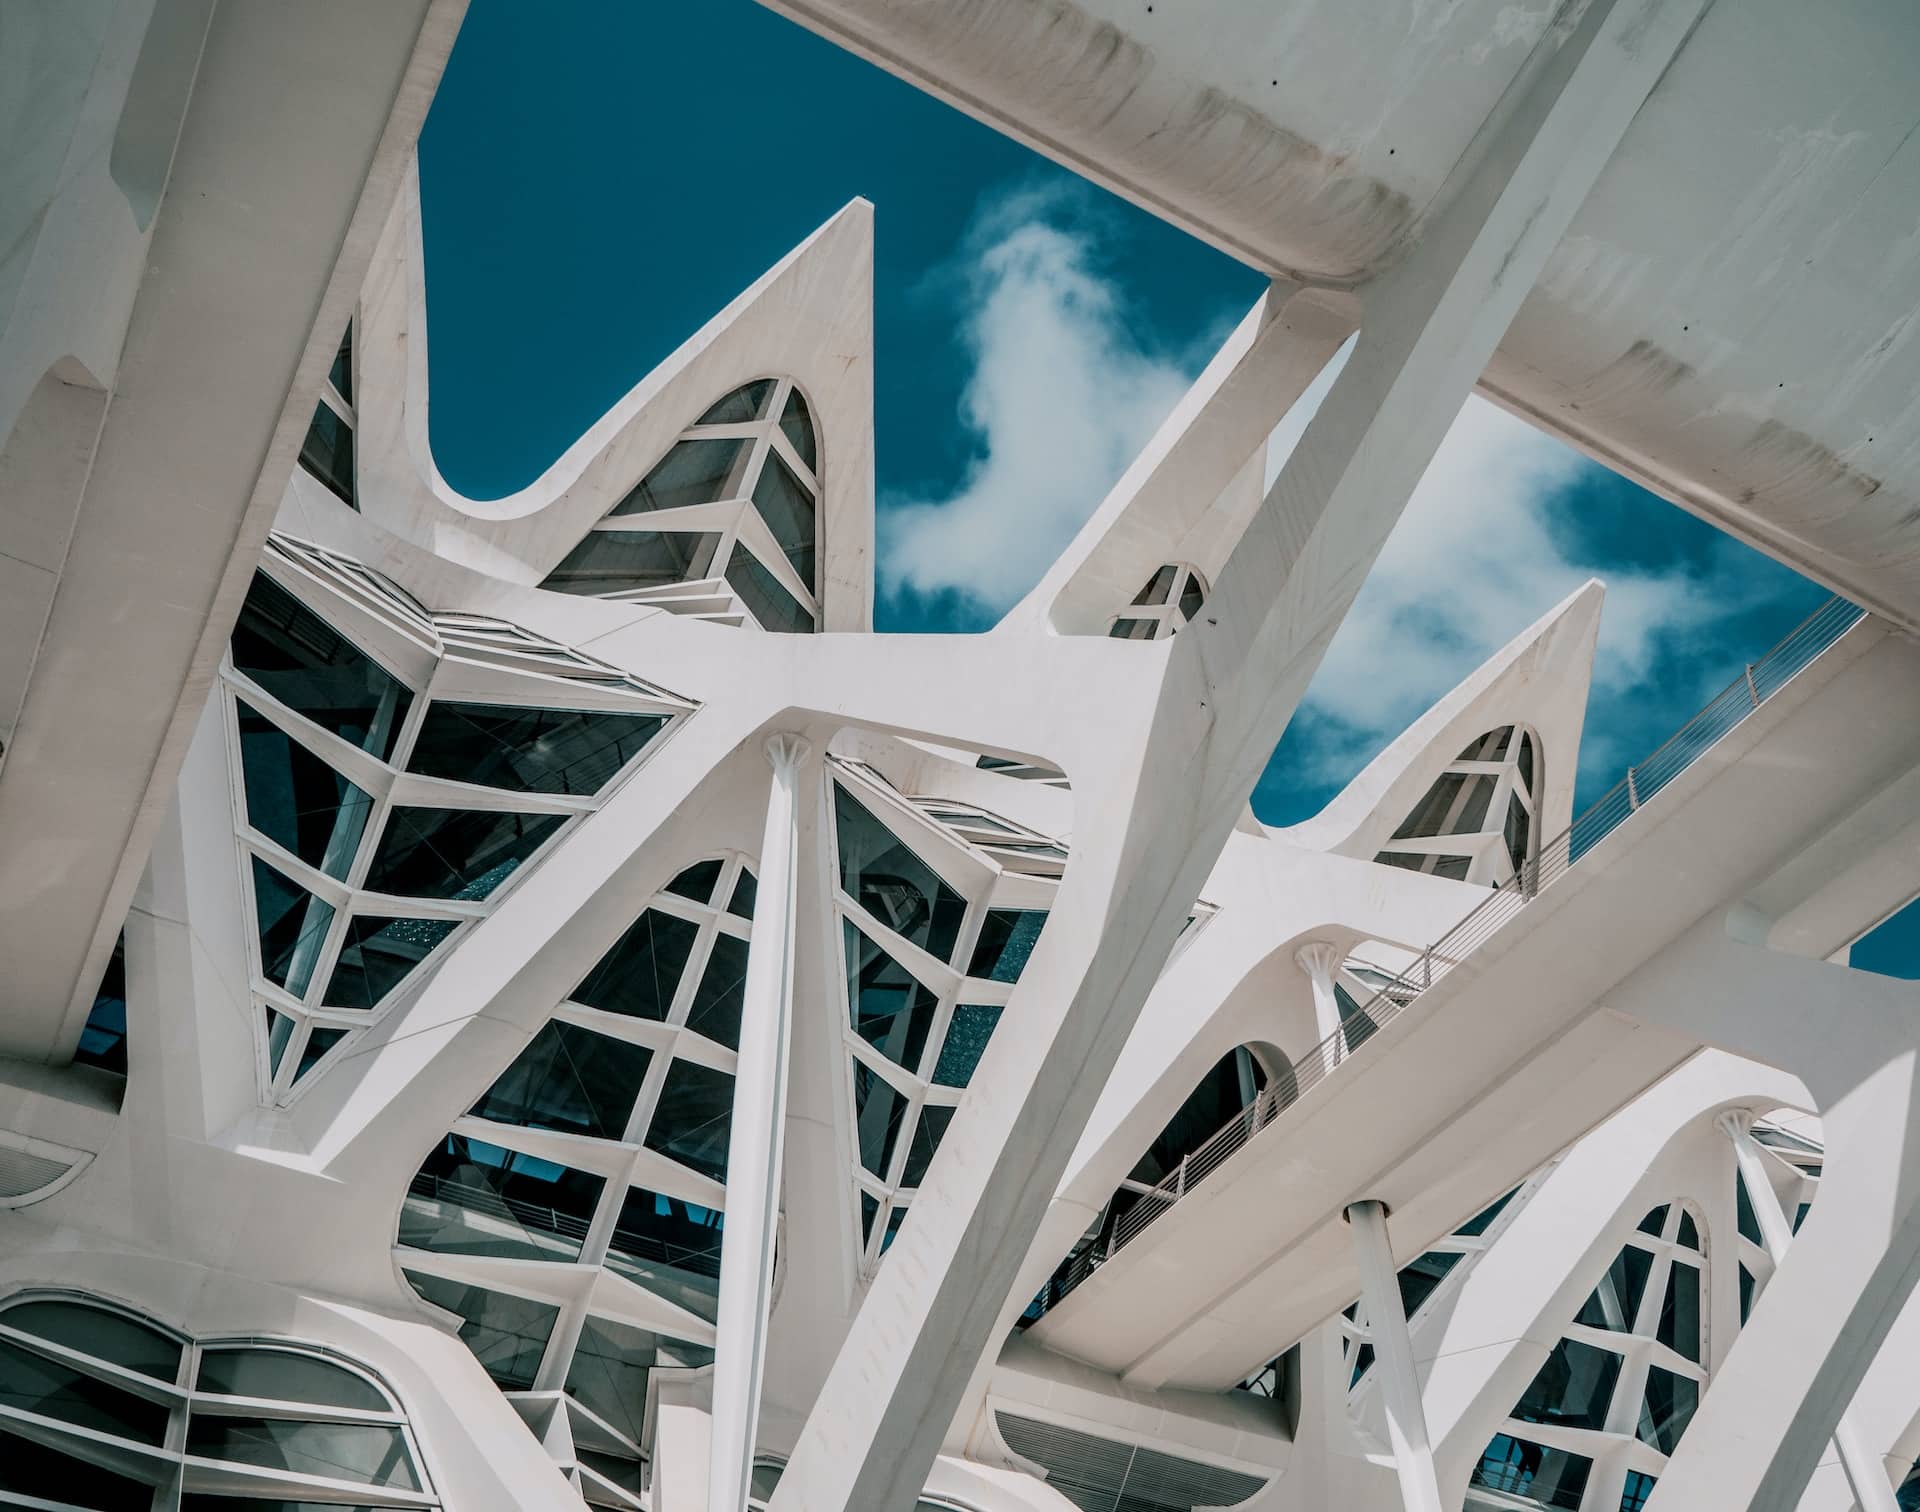 Although not as bustling as central Valencia, Quatre Carreres is home to the ultra-modern City of Arts and Sciences complex and many new hotels